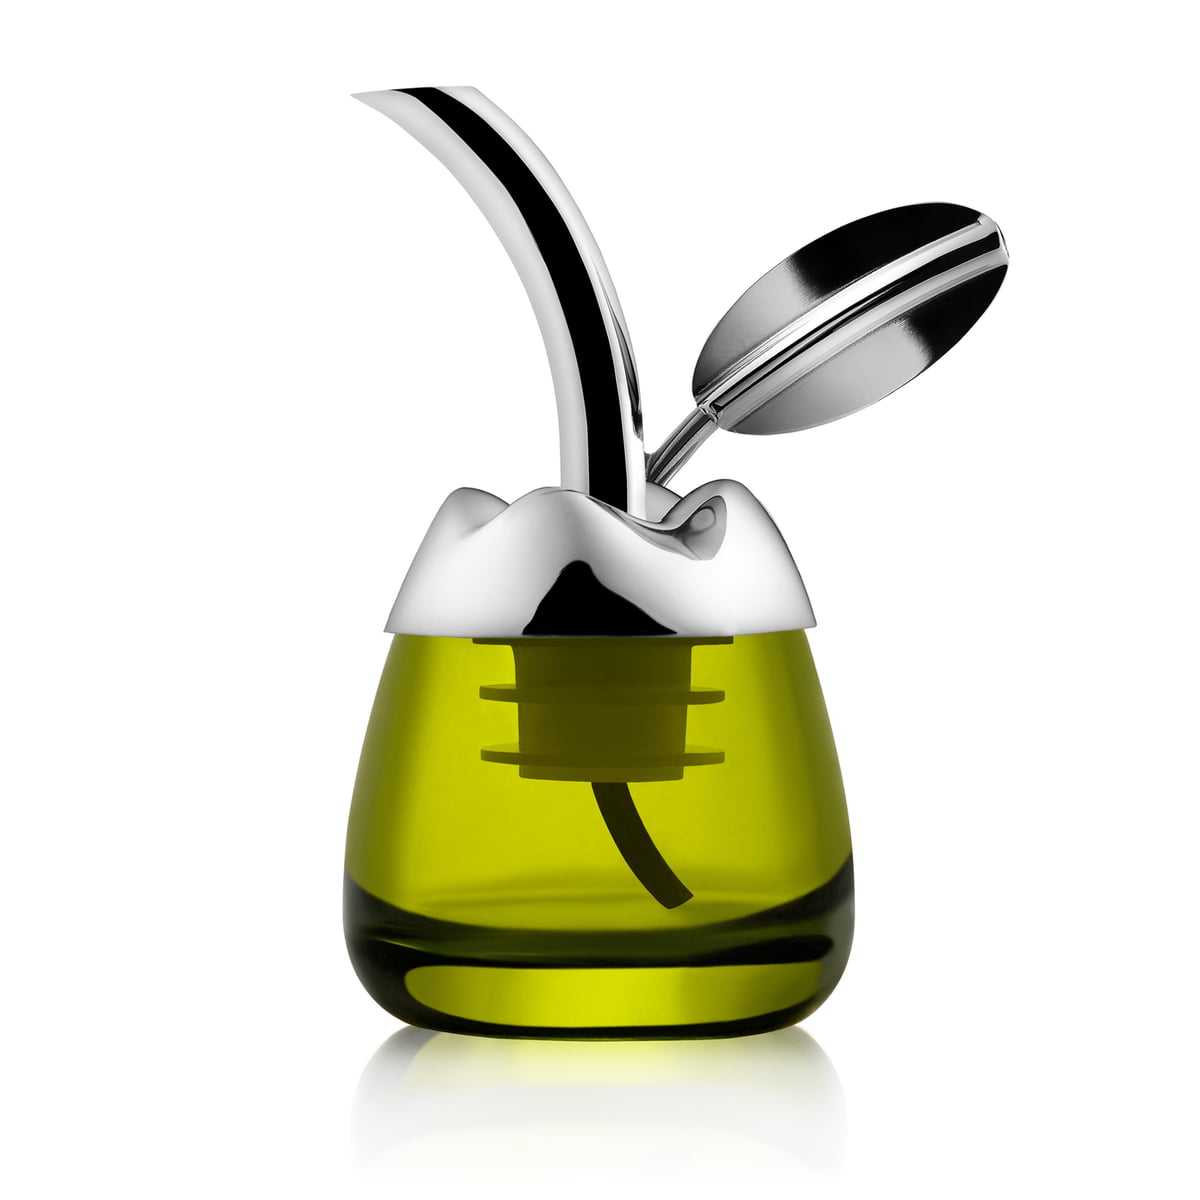 The Alessi Fior d'olio pourer in the shop